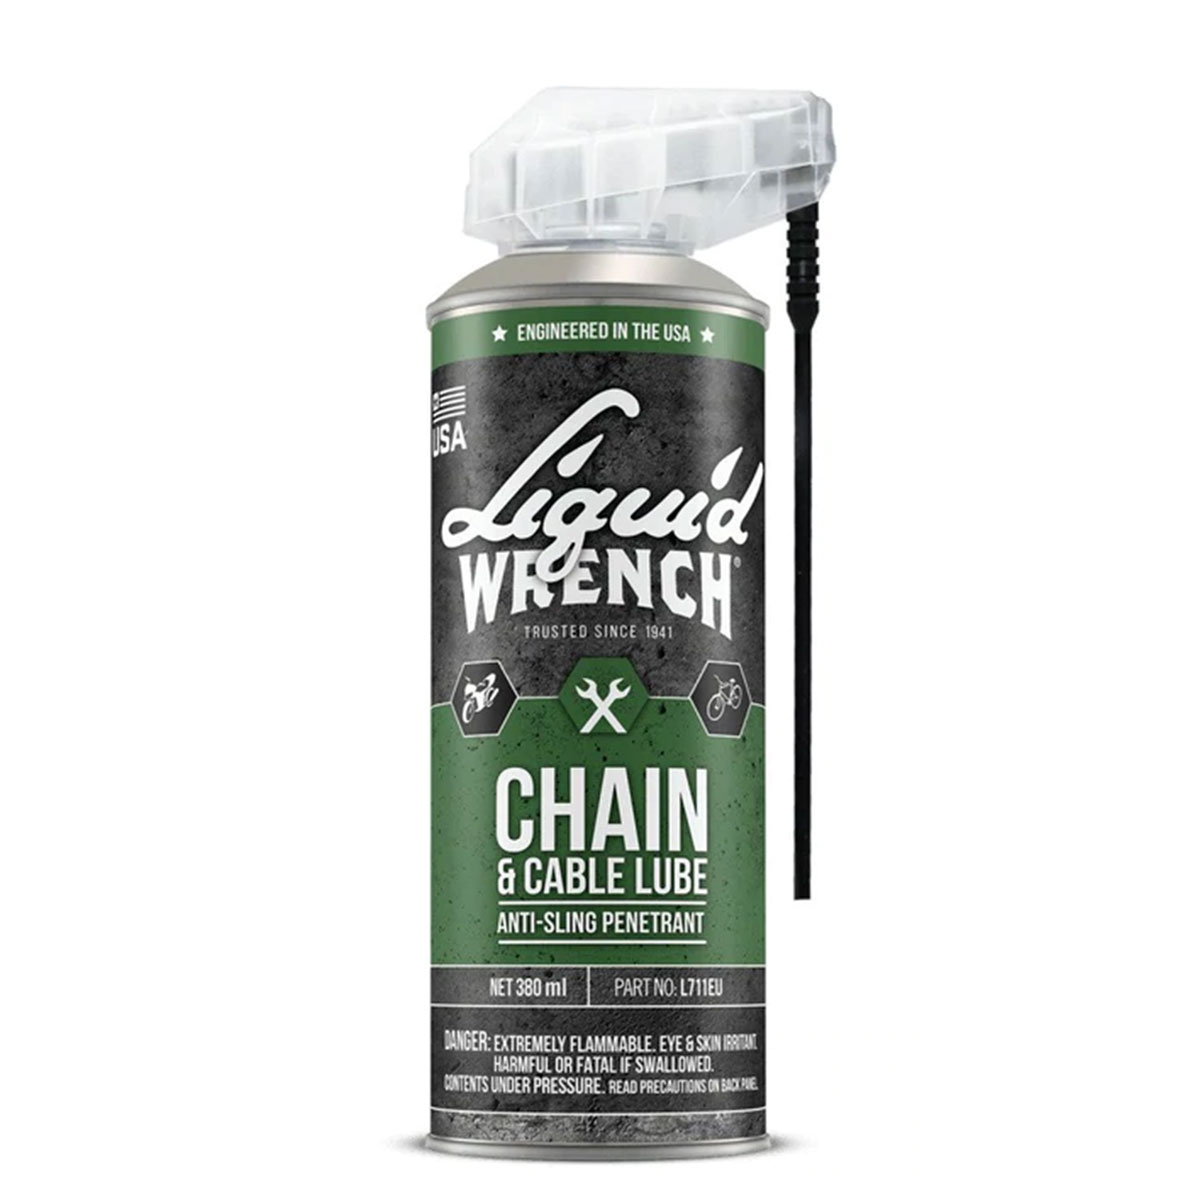 Chain & Cable Lube – Liquid Wrench